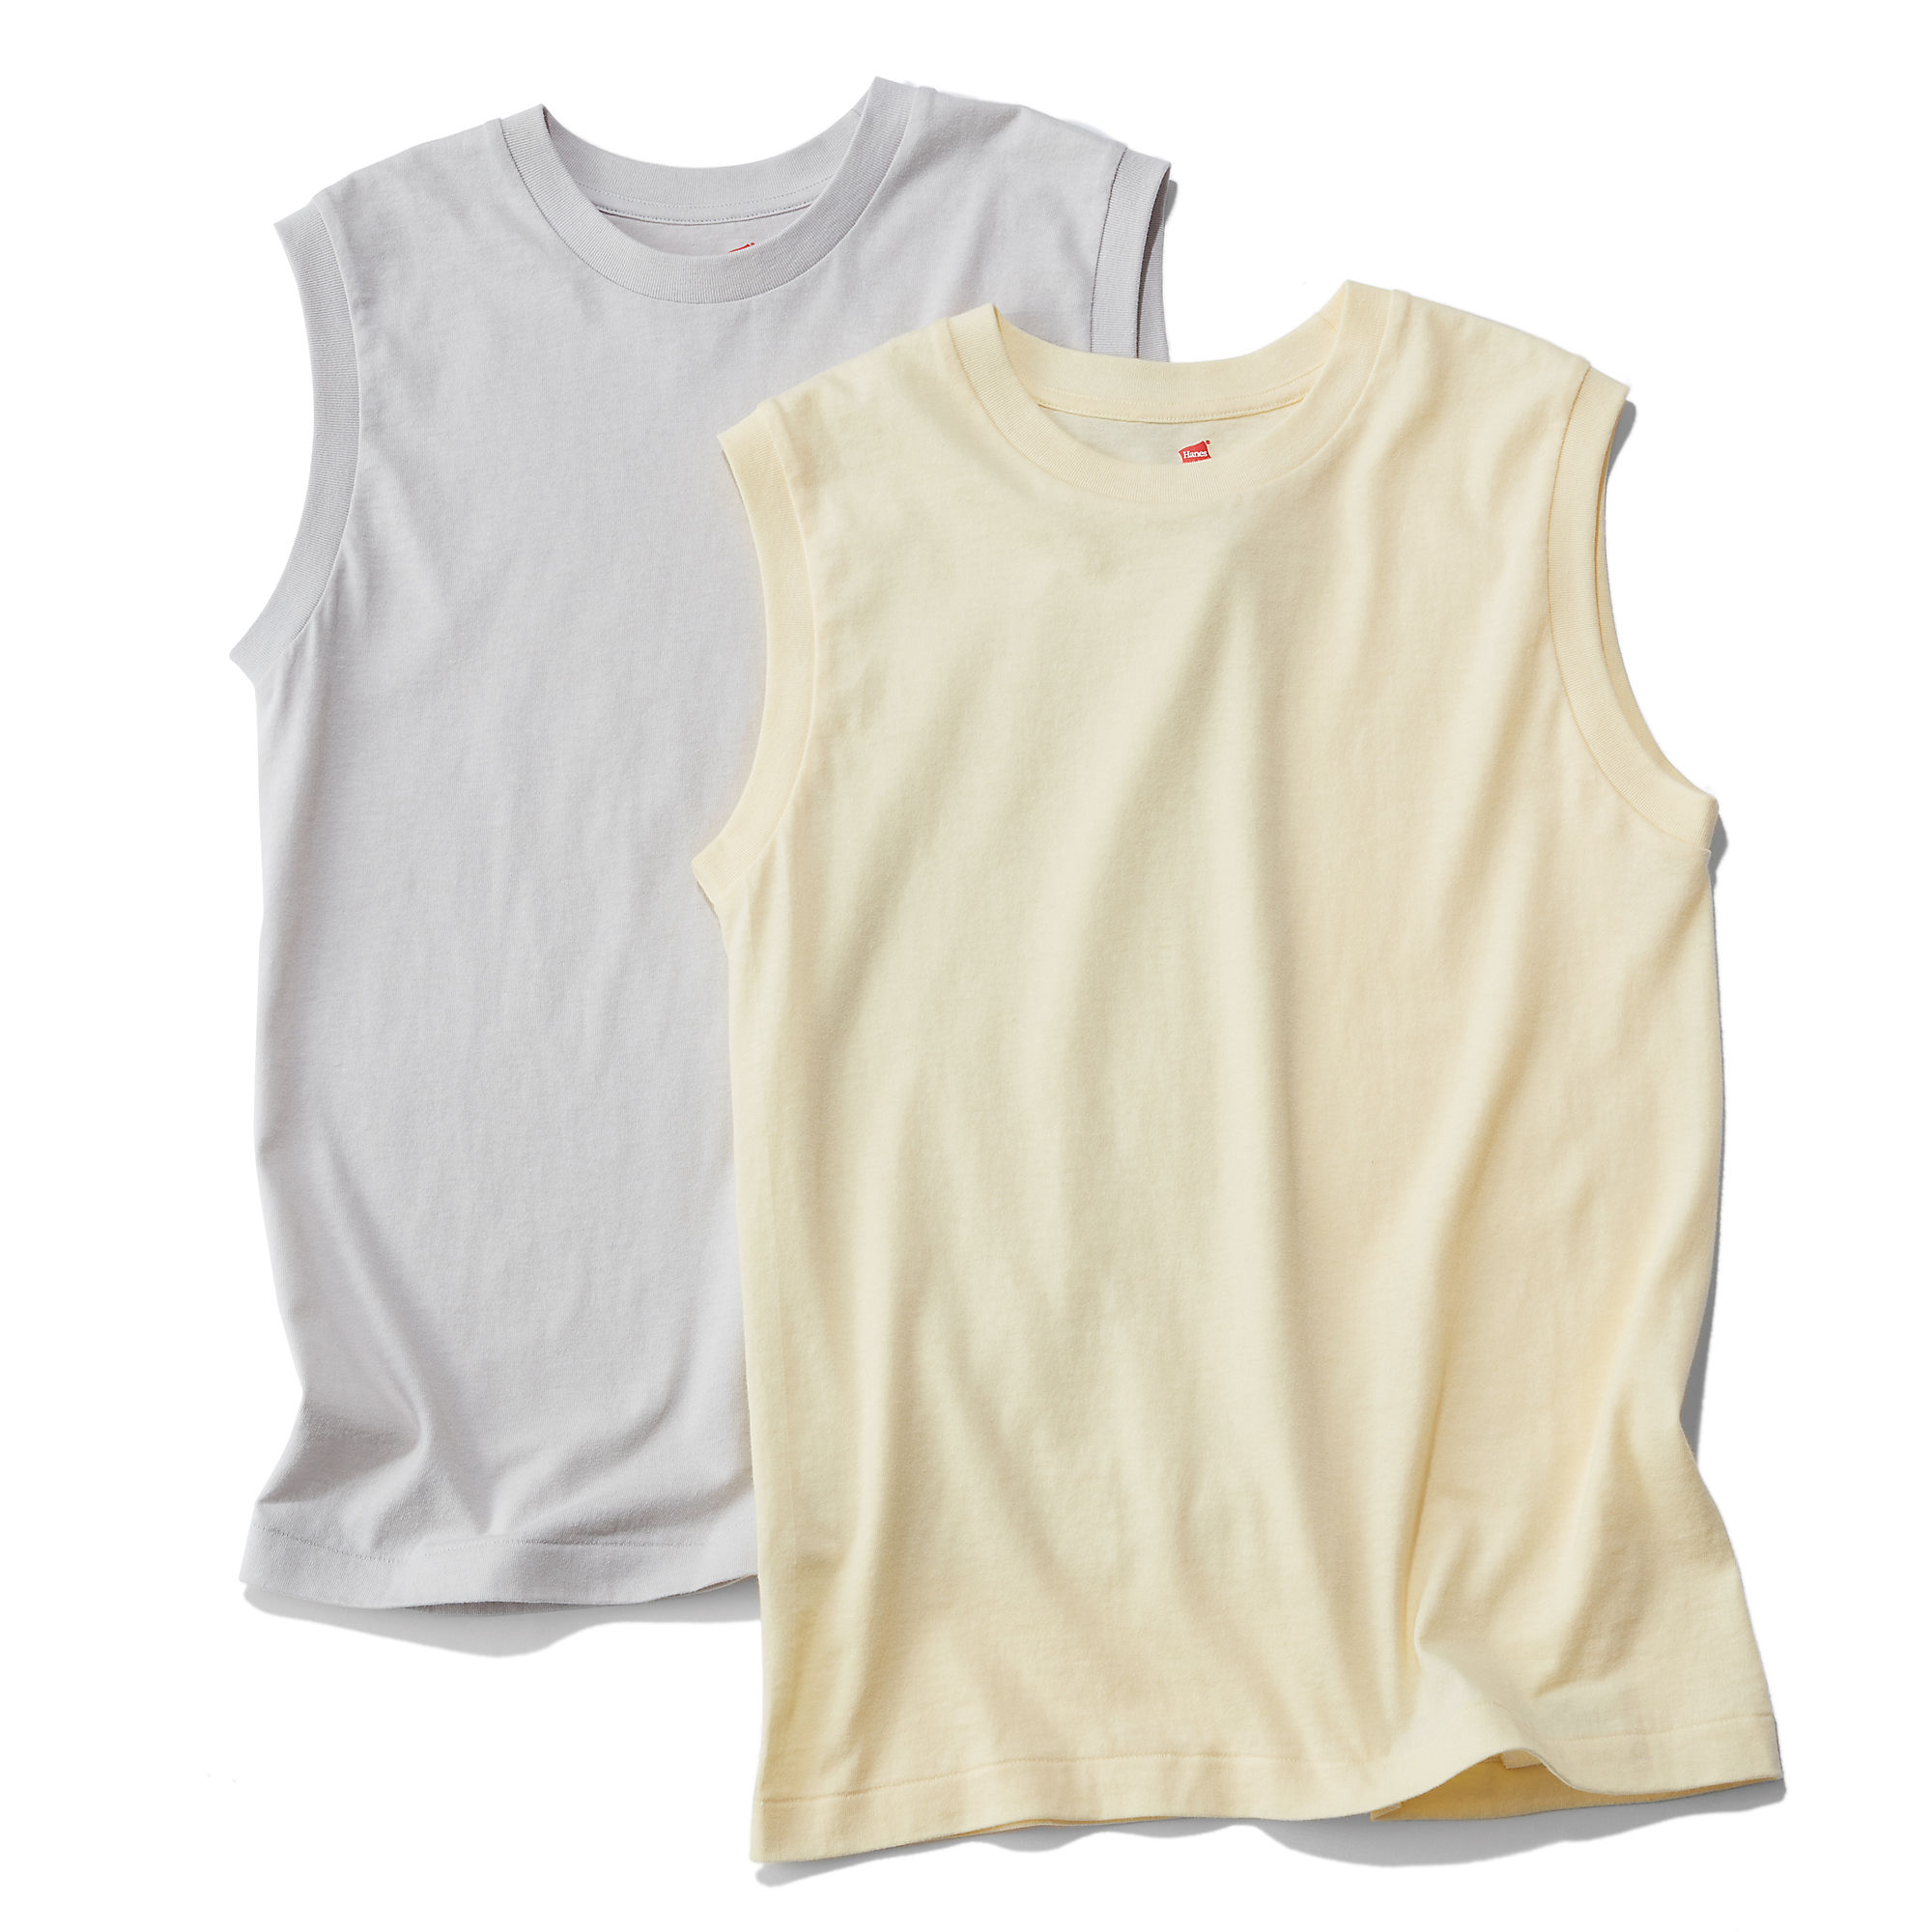 ADAM ET ROPE’
【Hanes for BIOTOP】Sleeveless T-shirts
￥5,280